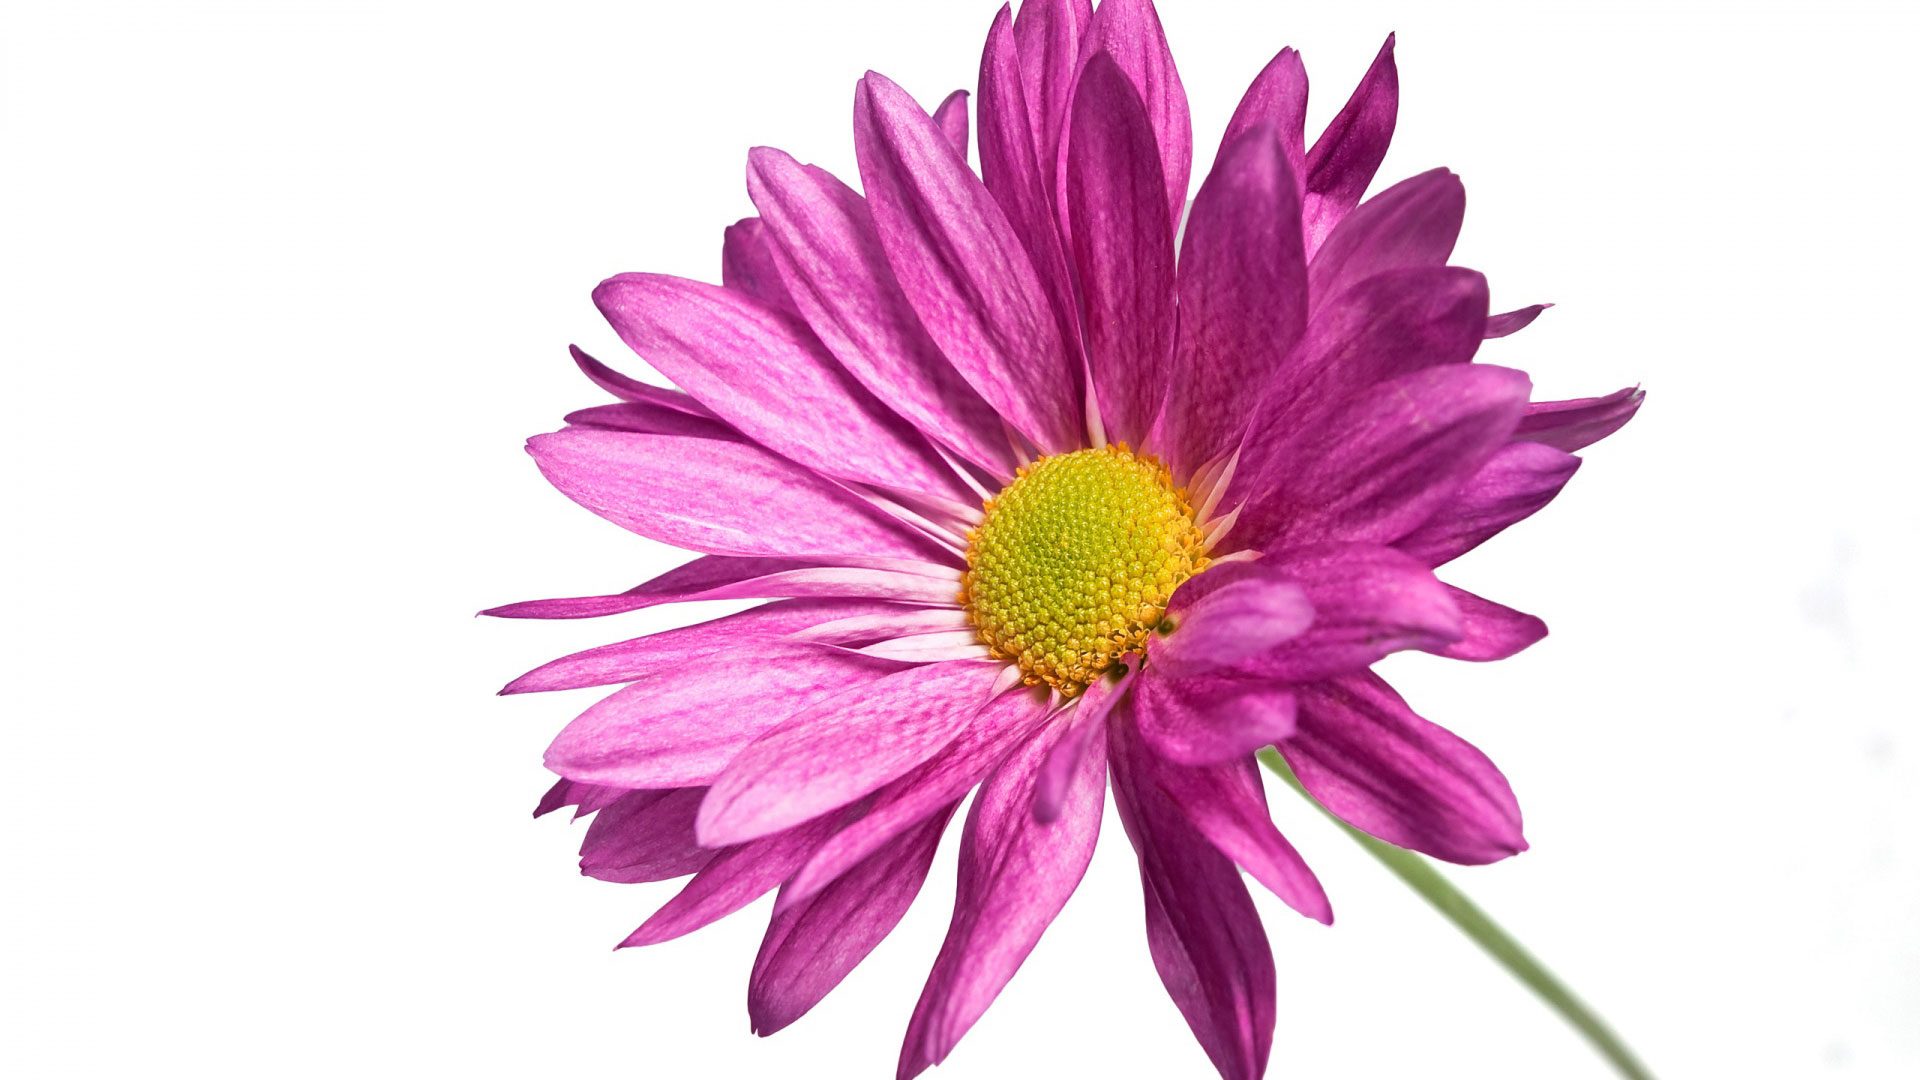 Flower Picture HD pink daisy 1080p HD - HD Wallpapers and Desktop ...